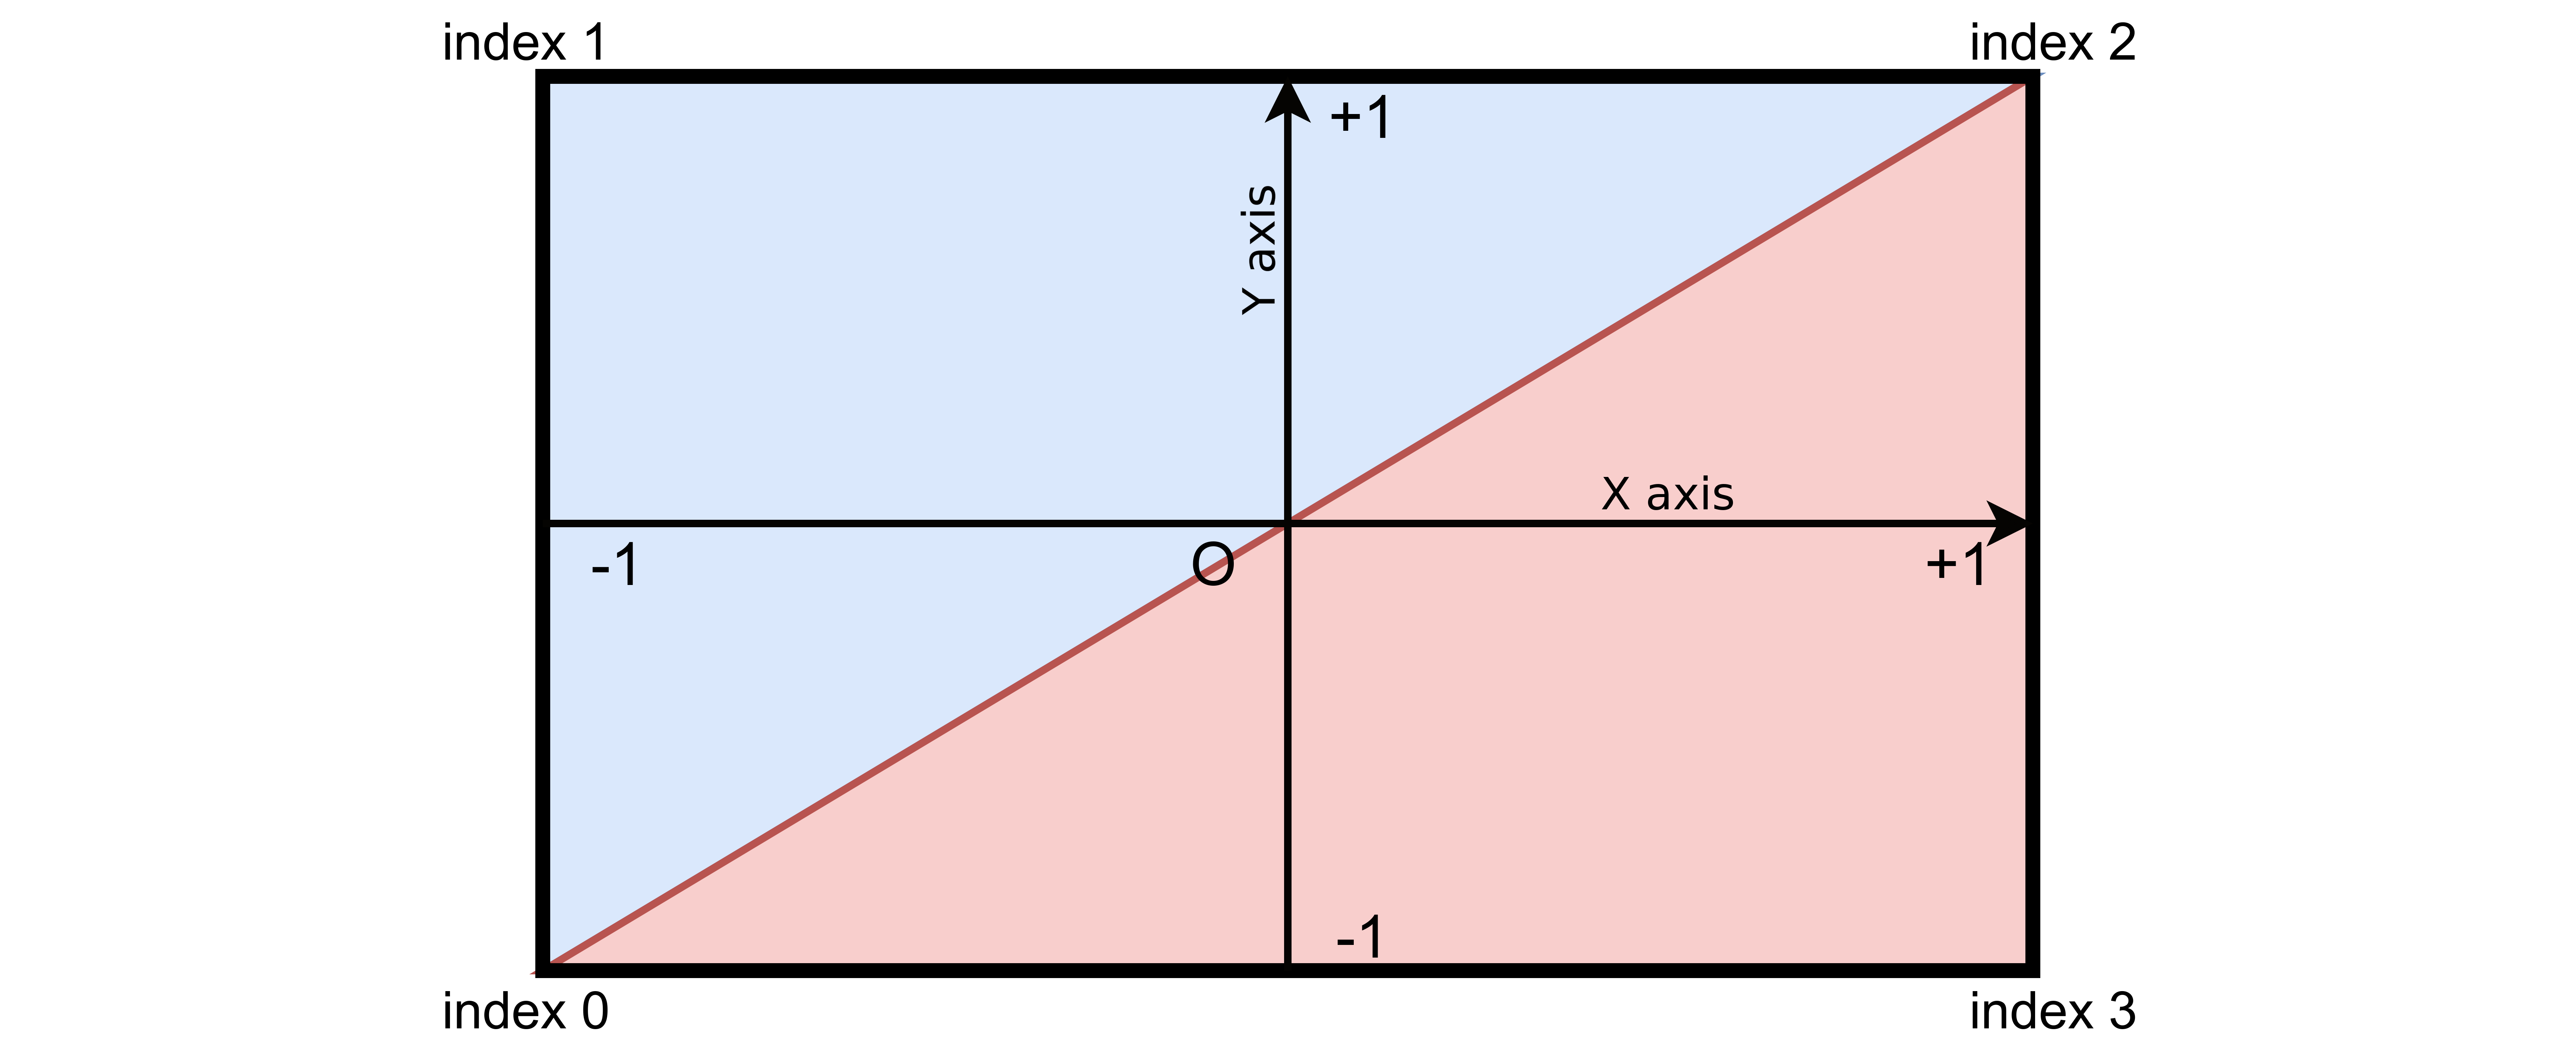 The 2 triangles fill the viewport. The top left triangle is displayed in blue. Its point indices are 0,1,2. The red bottom right triangle, which point indices are 0,2,3 is the second one.